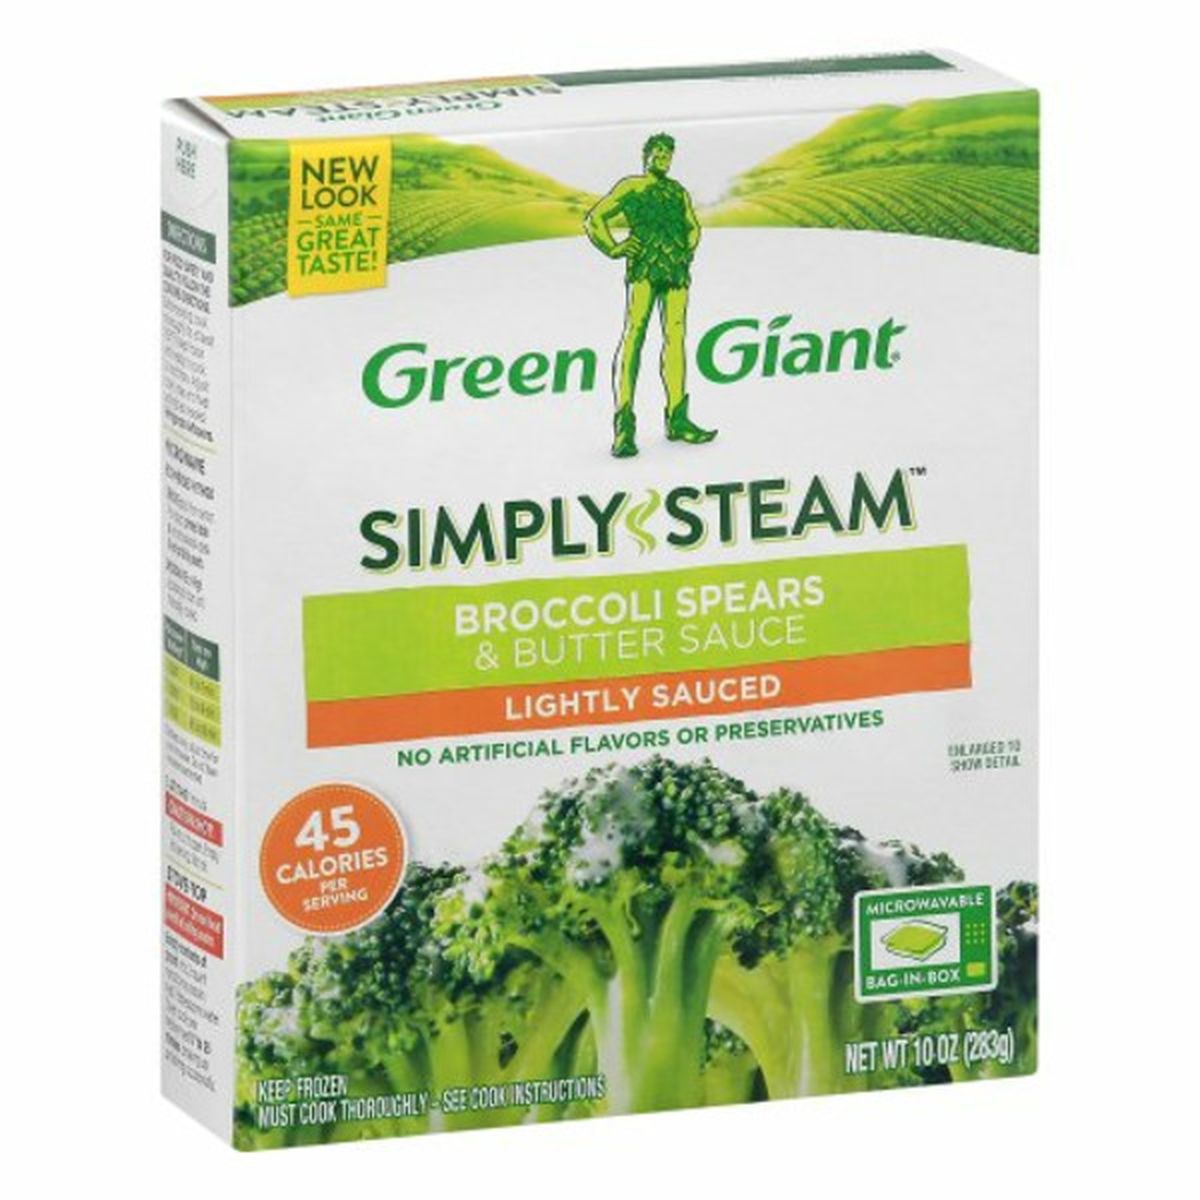 Calories in Green Giant Broccoli Spears & Butter Sauce, Lightly Sauced